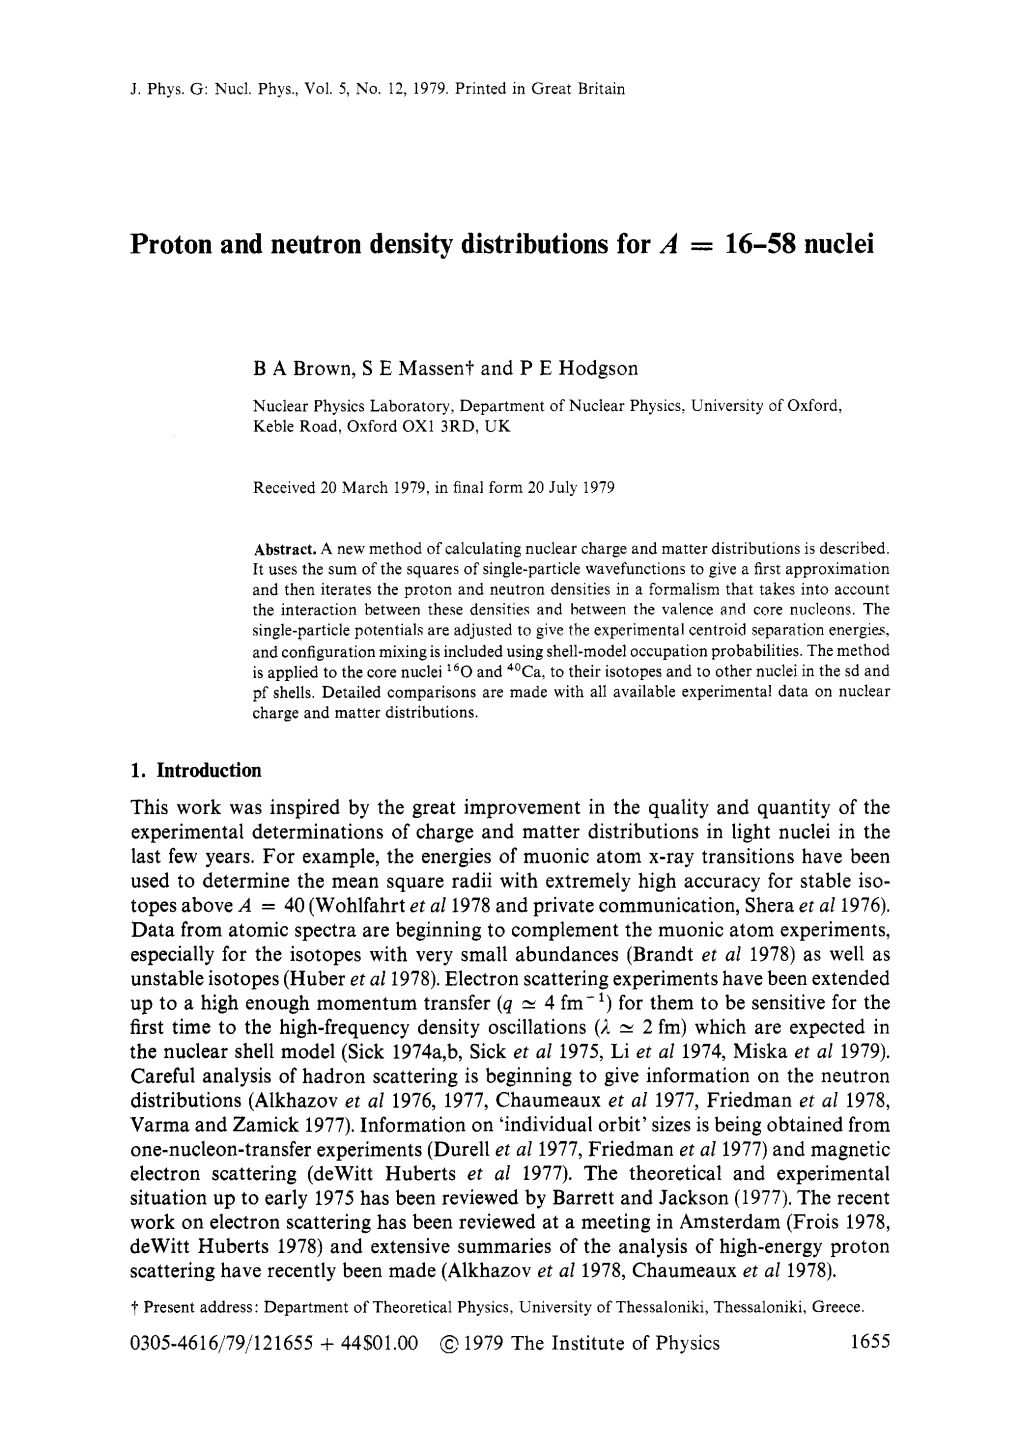 Proton and Neutron Density Distributions for a = 16-58 Nuclei